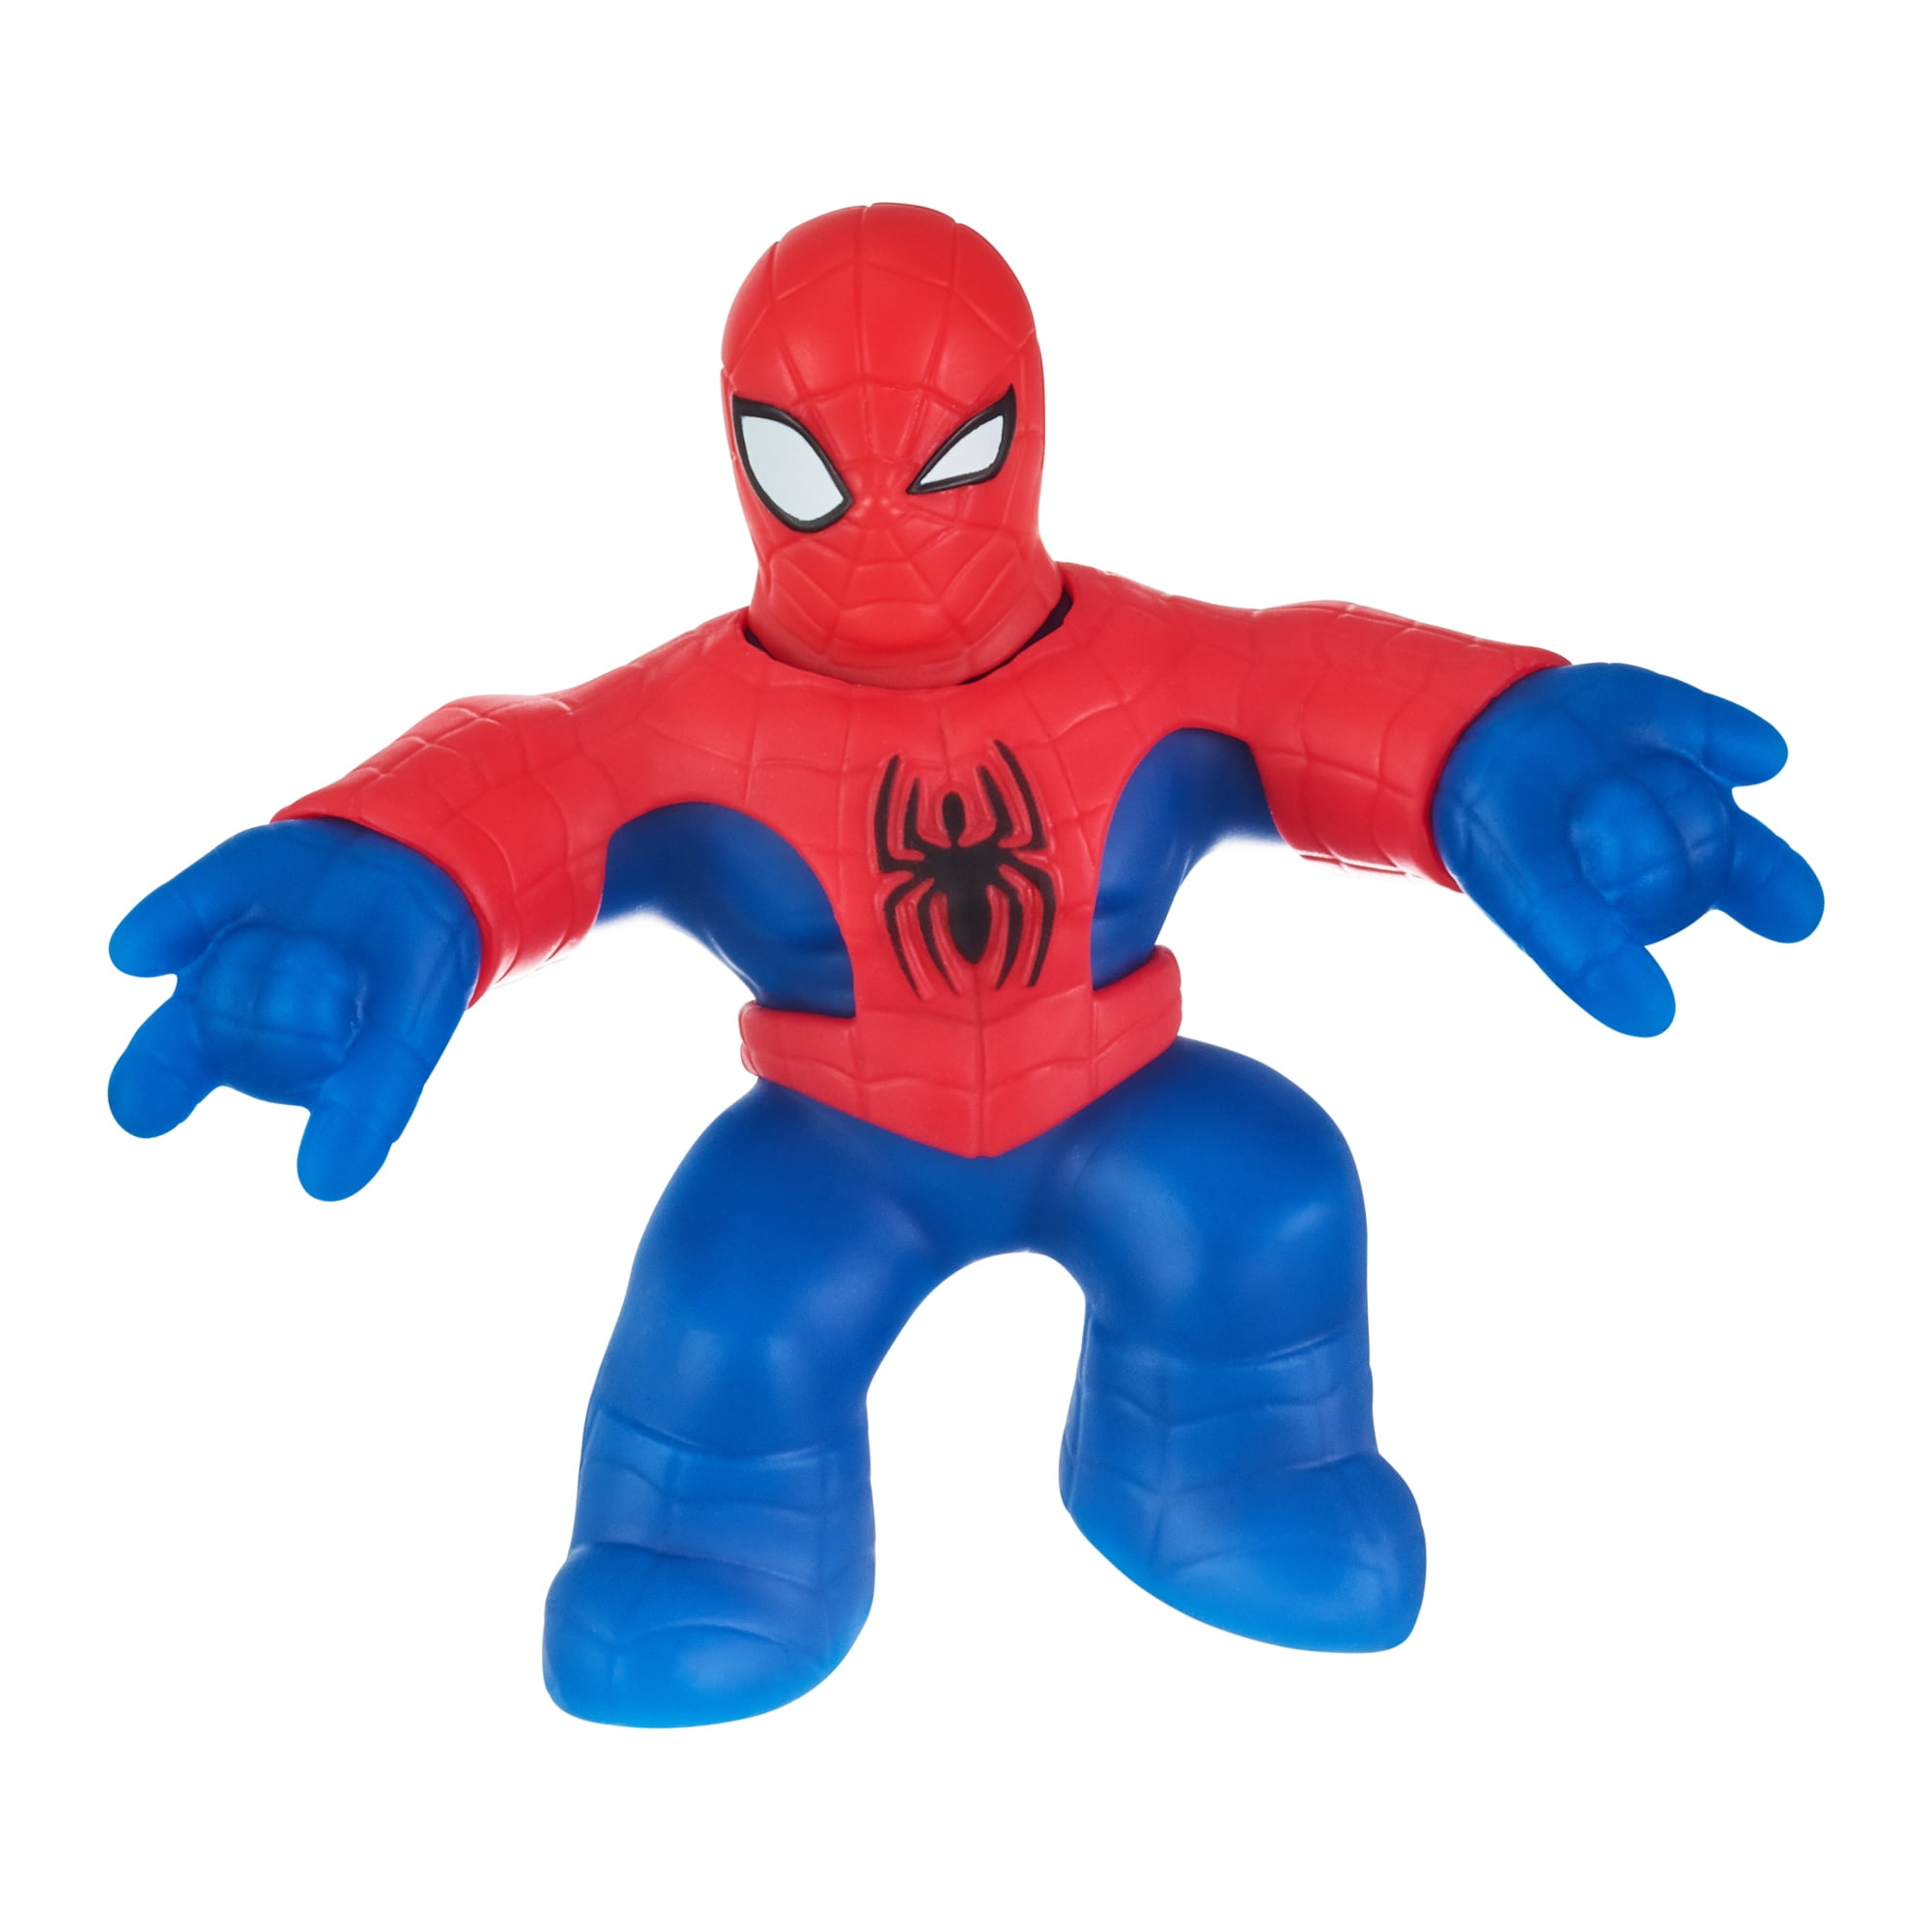 WITH PIVOT ARM CEILING FAN PULLS S CHOICE OF 1 OR 2 MARVEL SPIDER-MAN FIGURE 